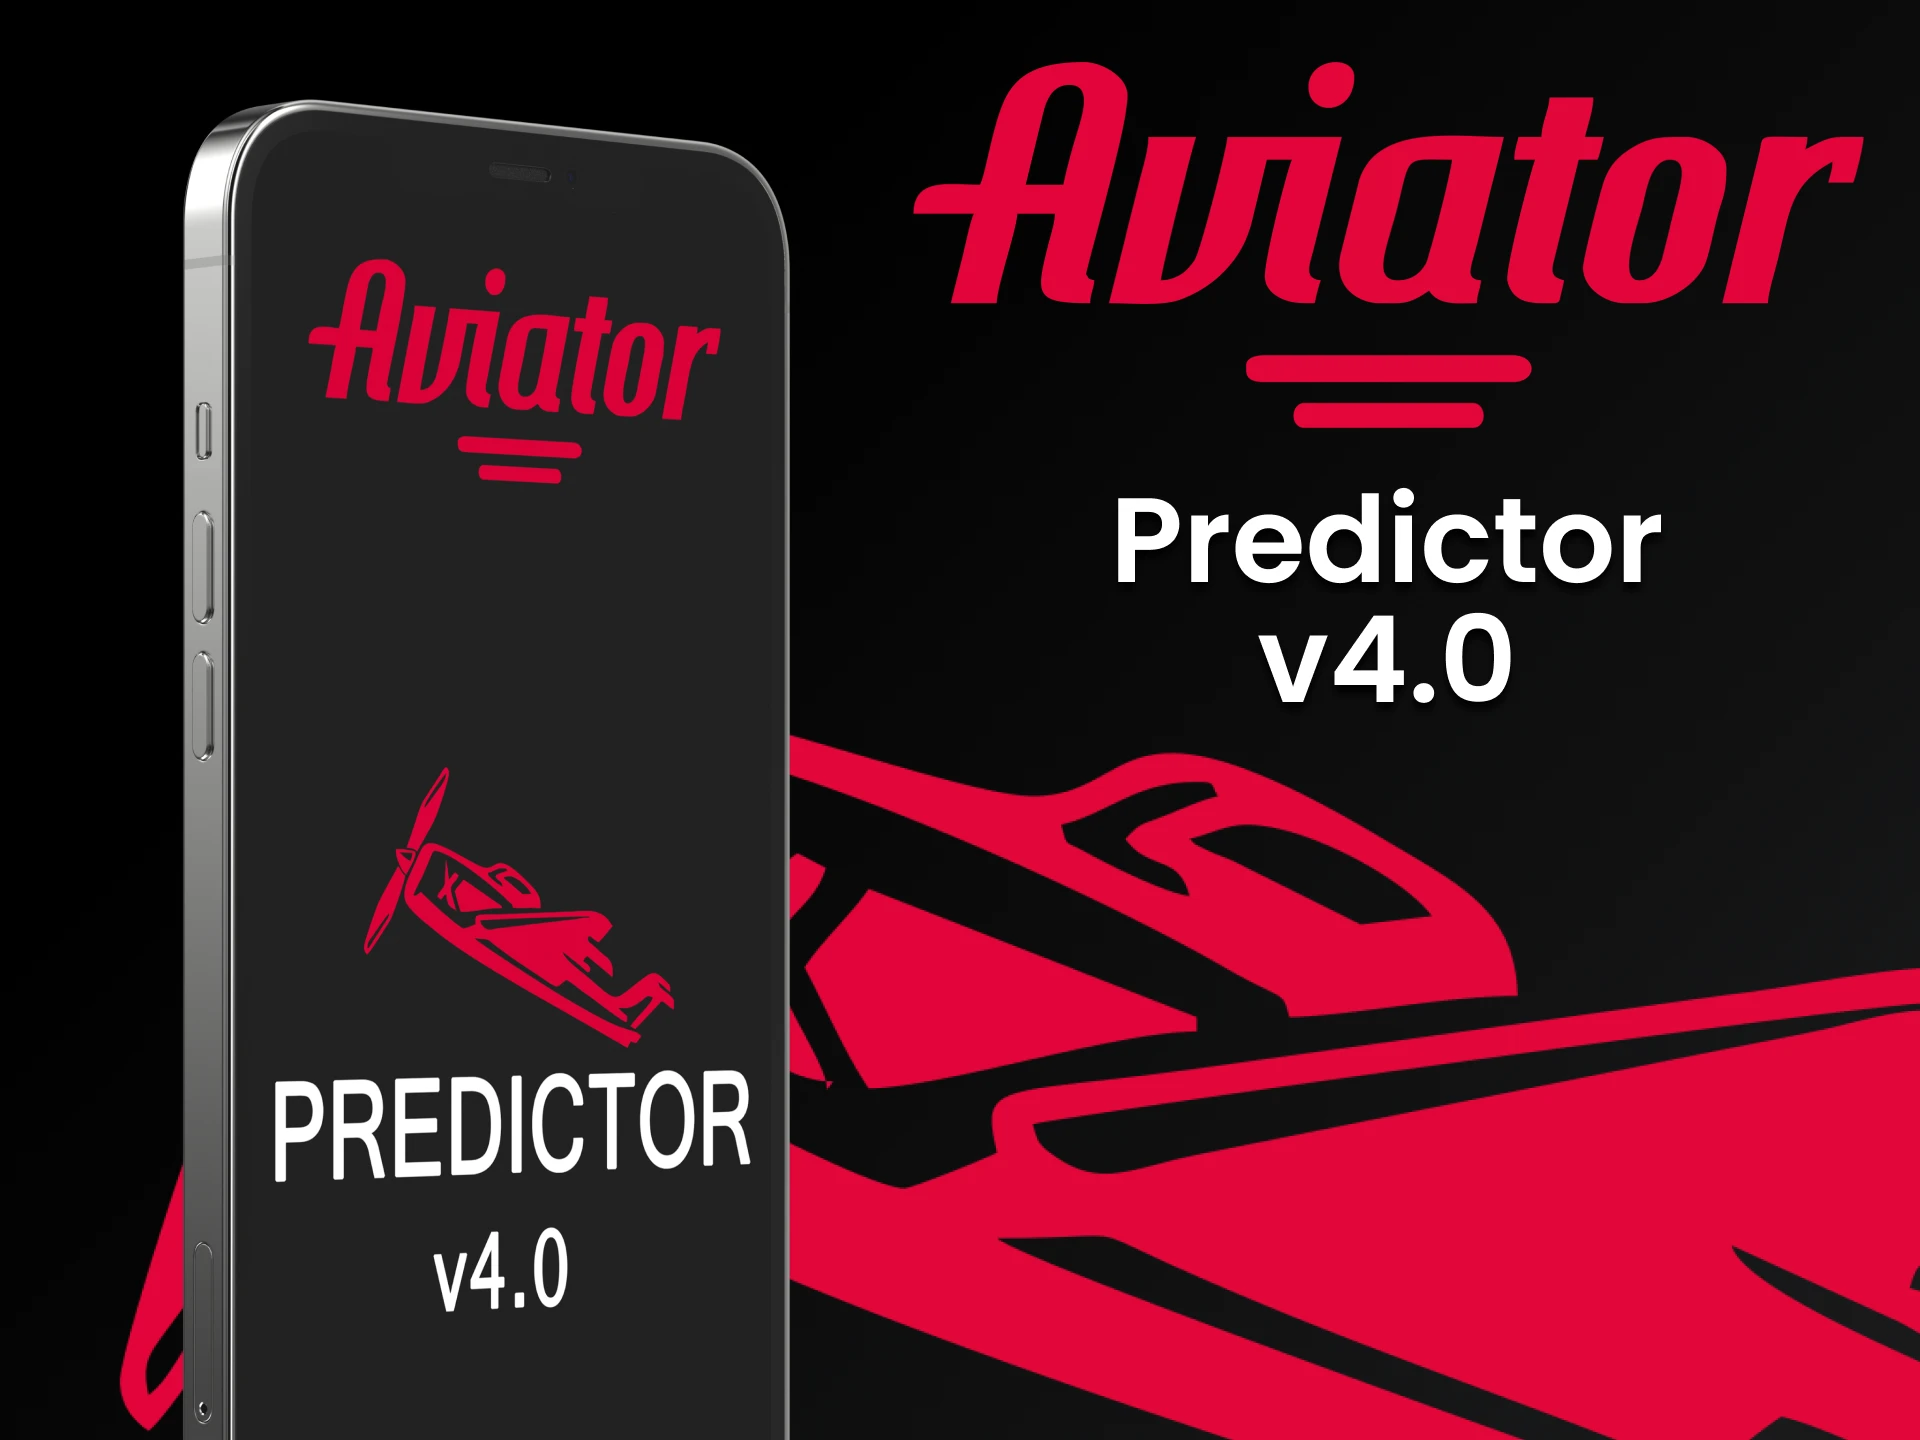 We will talk about Predictor v4.0 for Aviator.